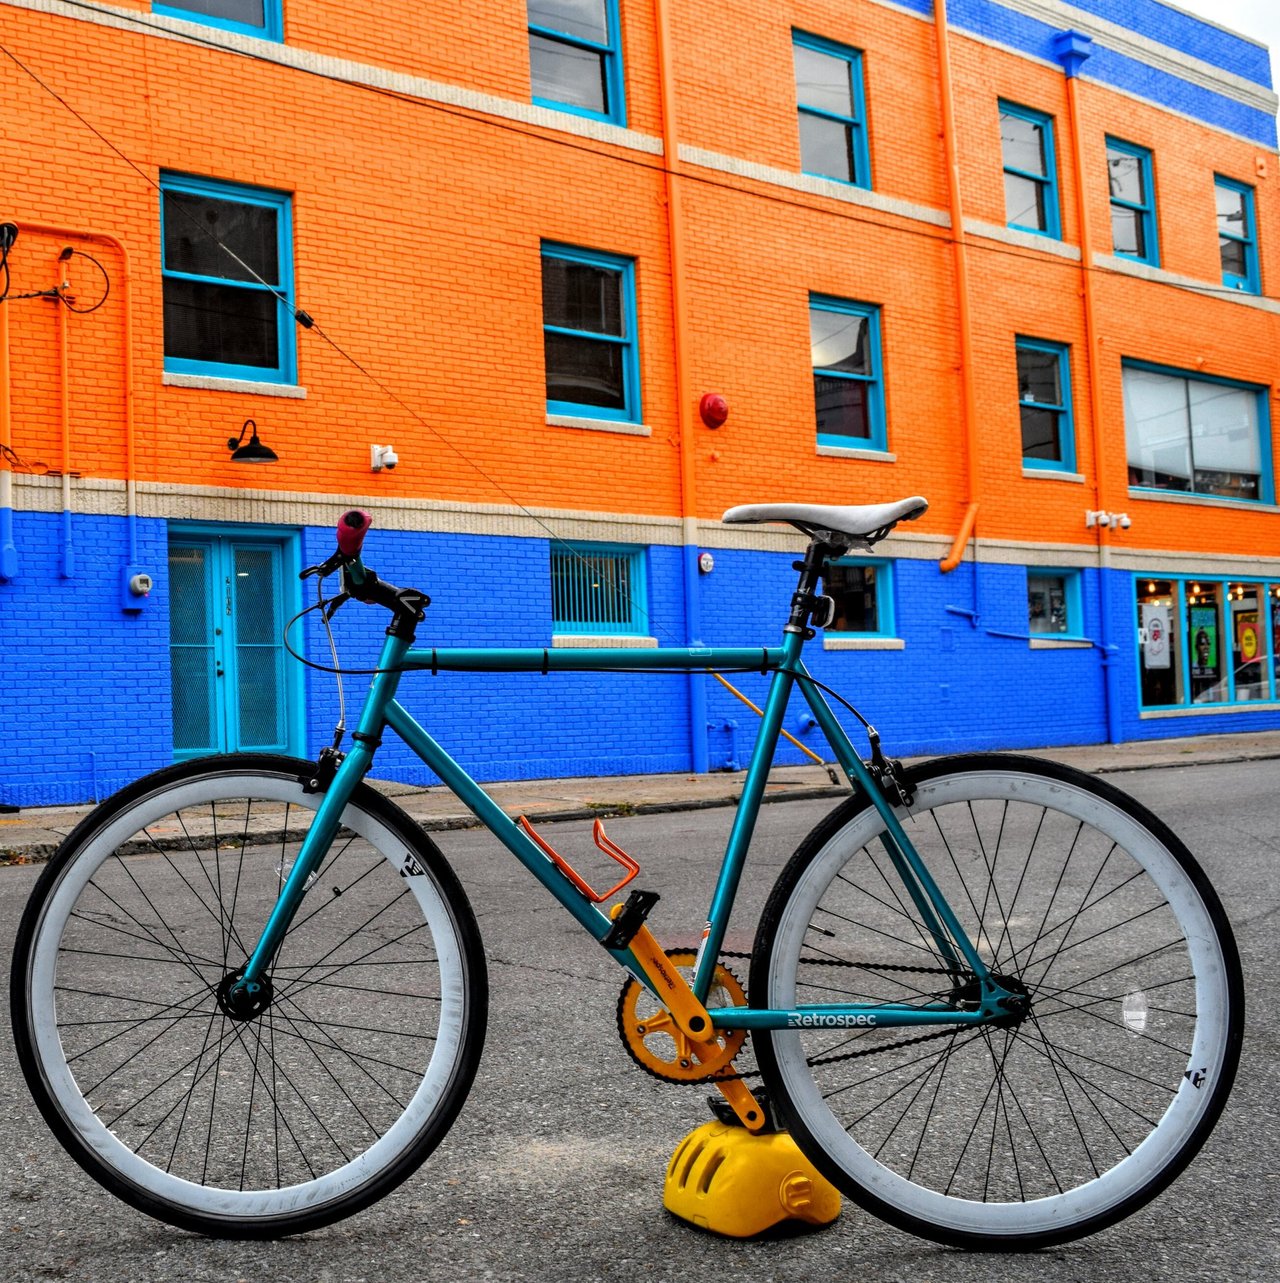 My #bicycle n New Orleans #streetart . by @picturenola..Media@#bananasocialmedia #travel ✈ #vacation #nola https://t.co/qC5eaY2Aby